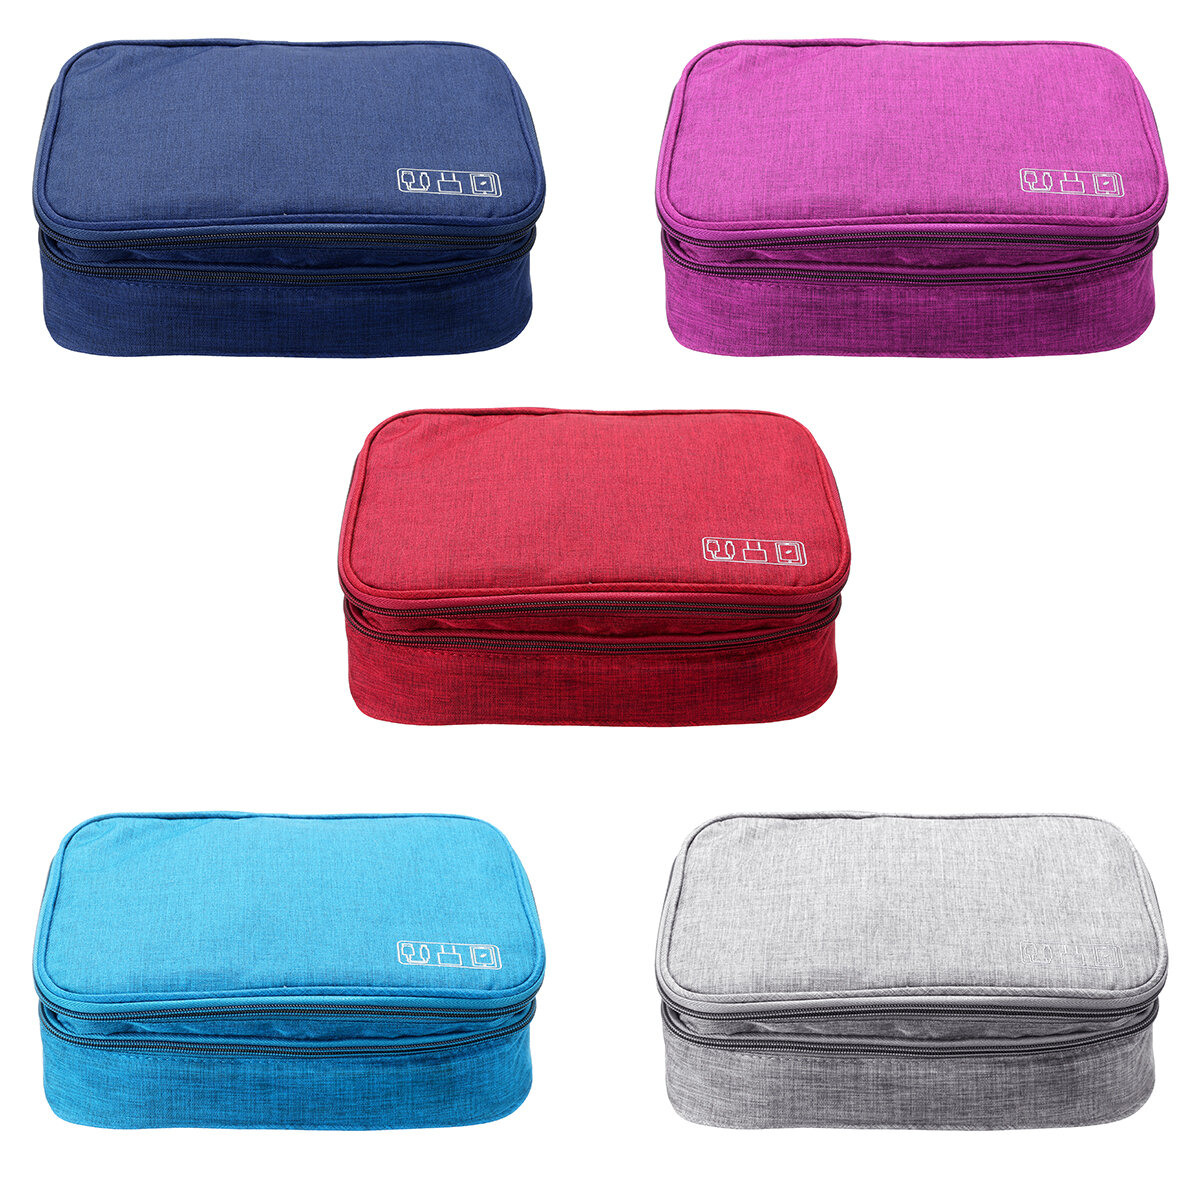 Data Cable Storage Bag Multifunctional Digital Devices Stationery Case Portable Travel Electronic Po